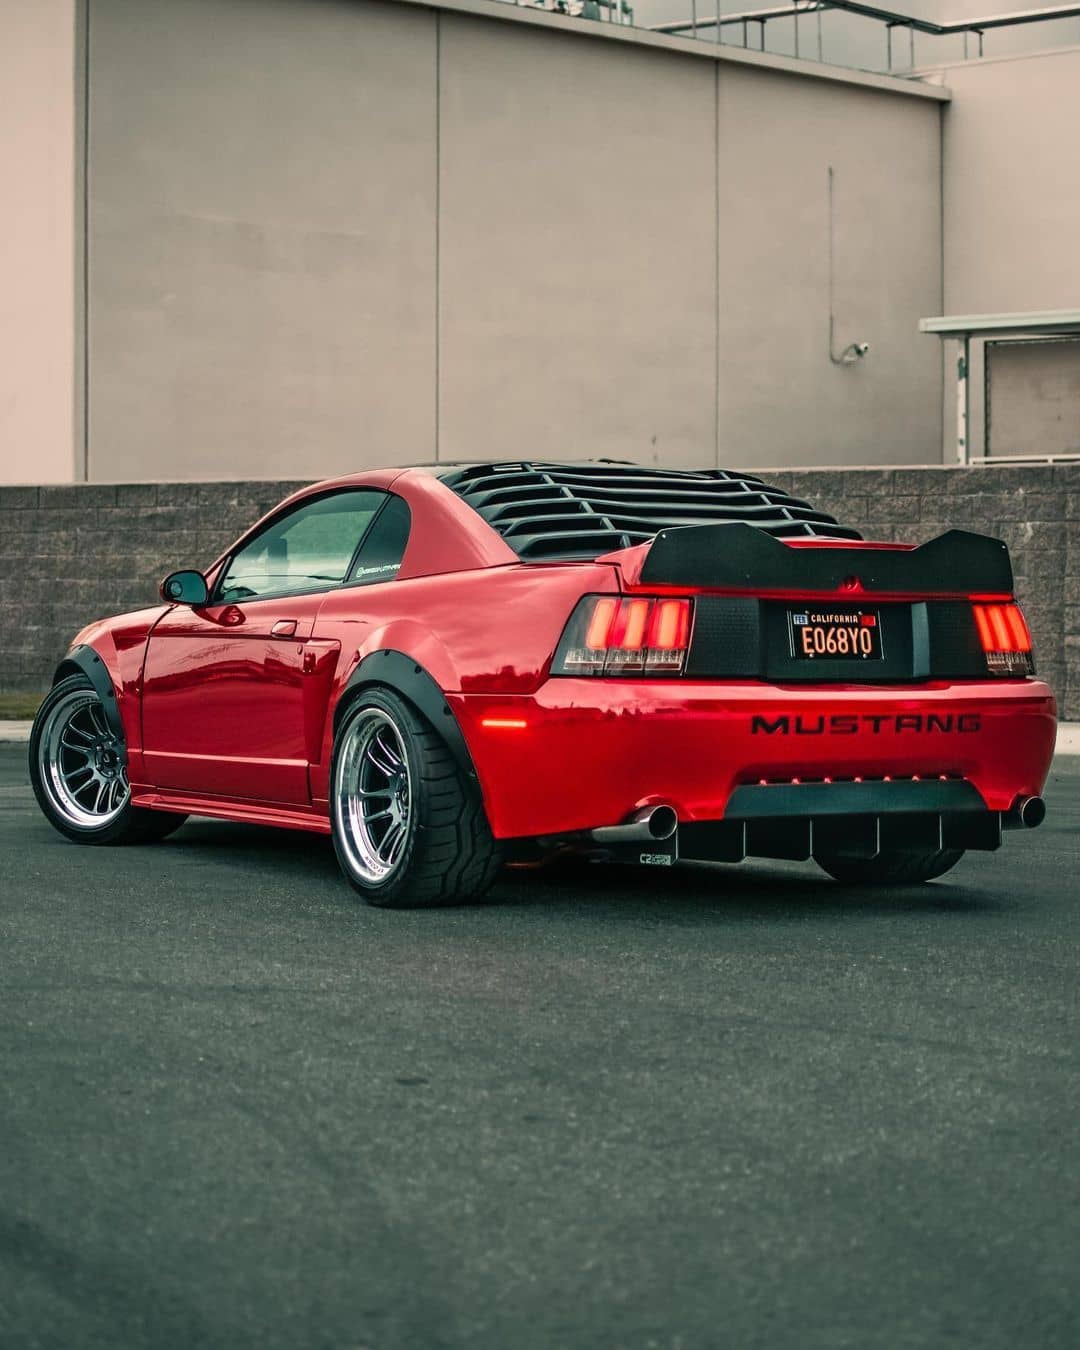 Modified Ford Mustang New Edge with wide 315/30R18 rear tires